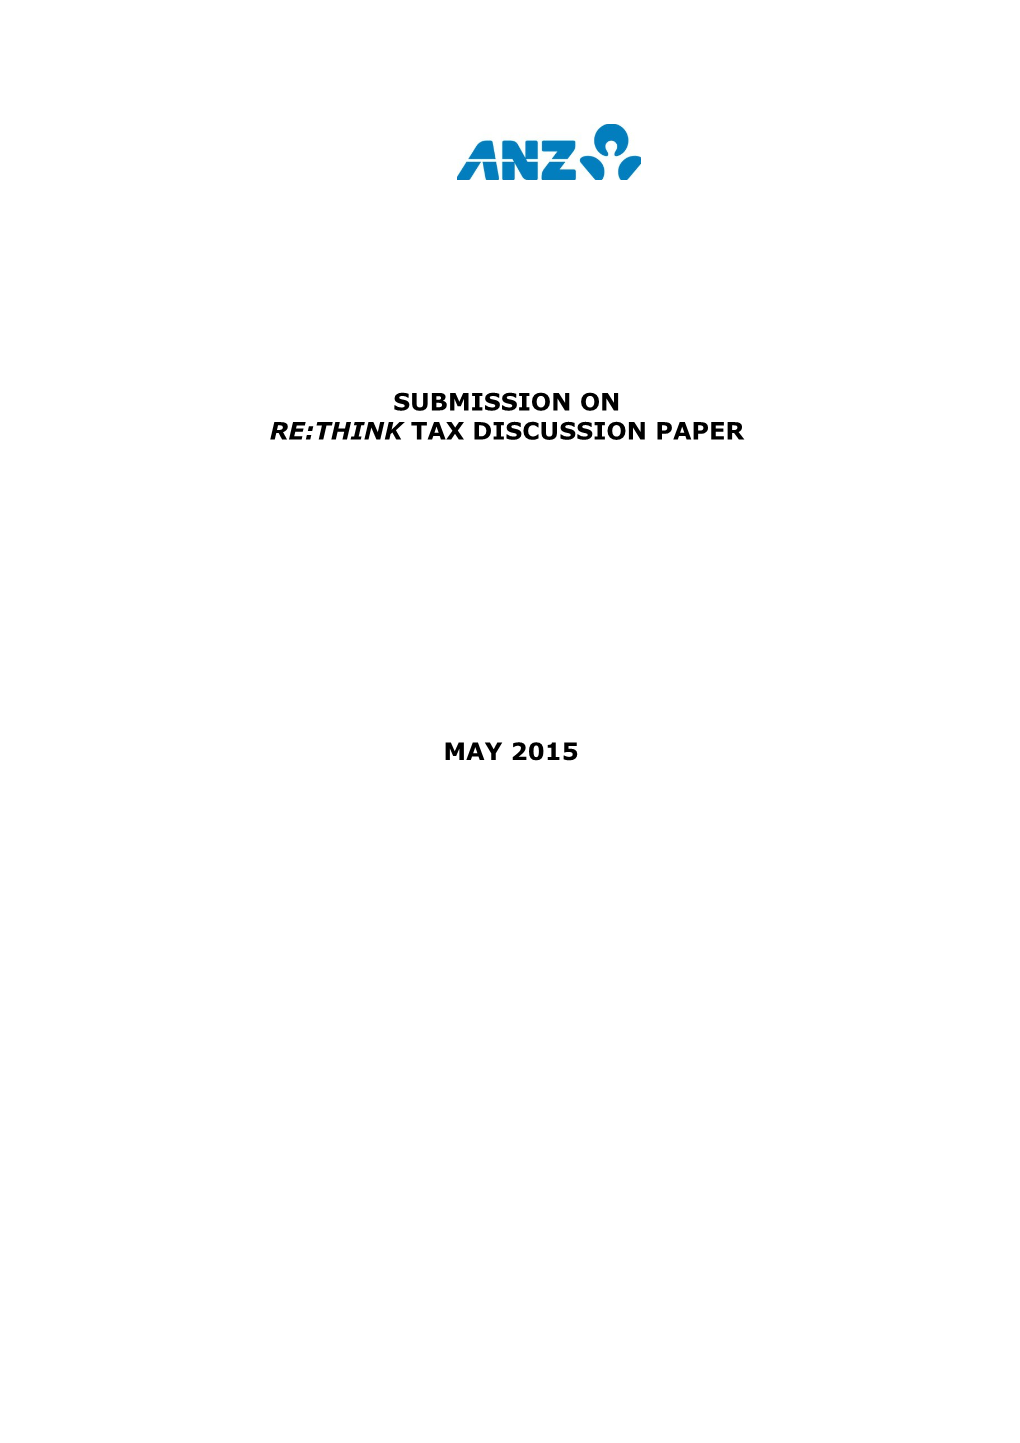 ANZ - Submission to Tax Discussion Paper